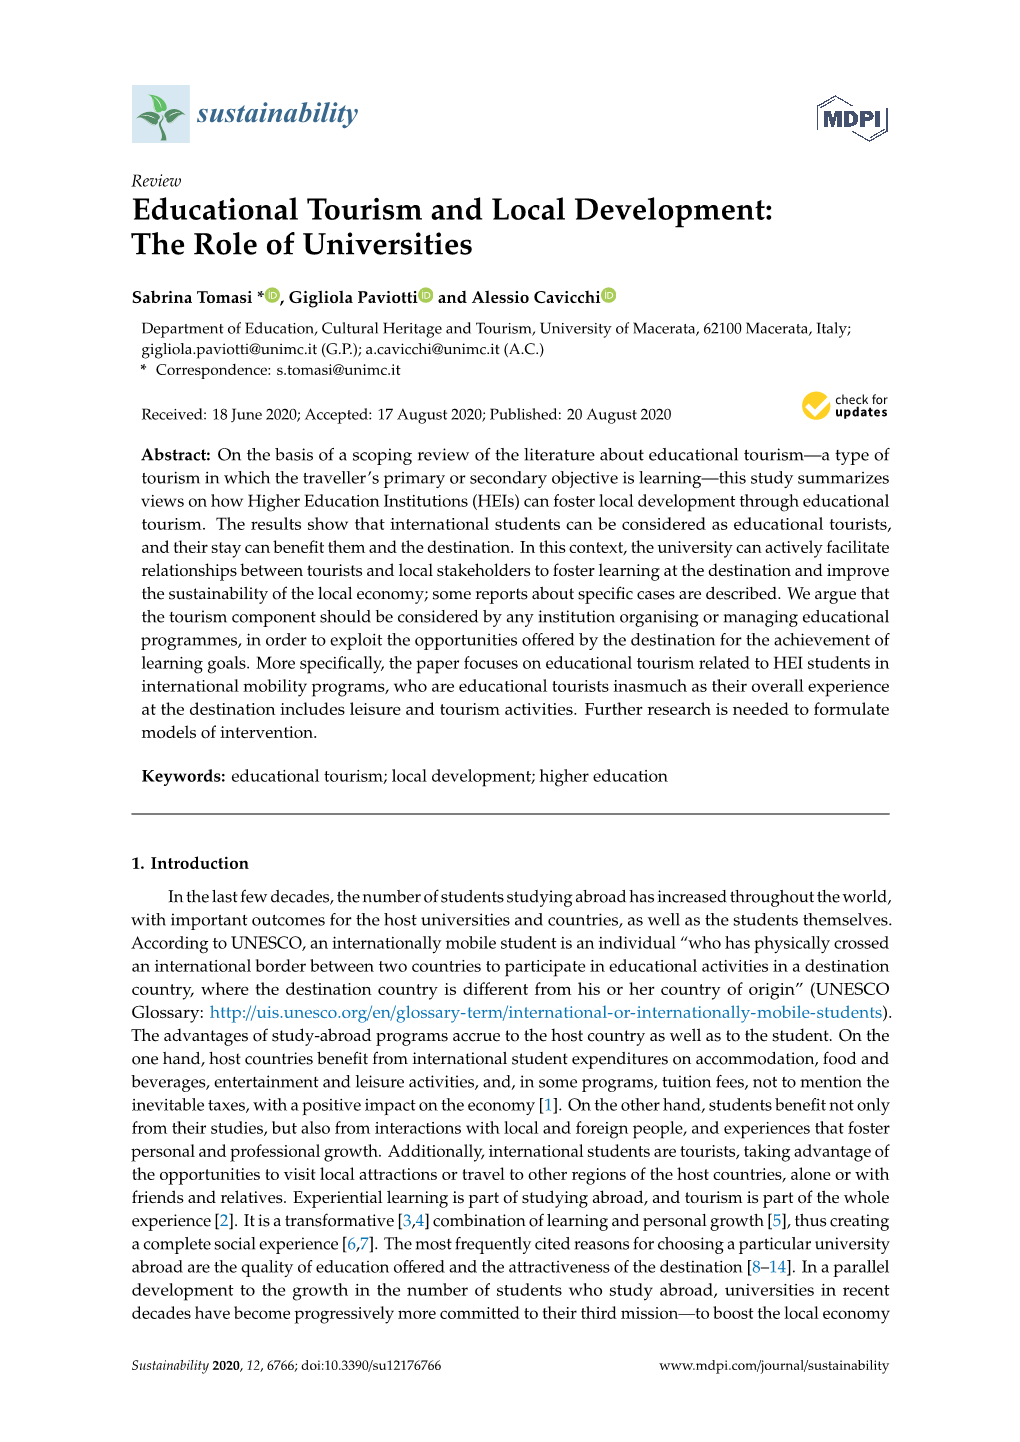 Educational Tourism and Local Development: the Role of Universities